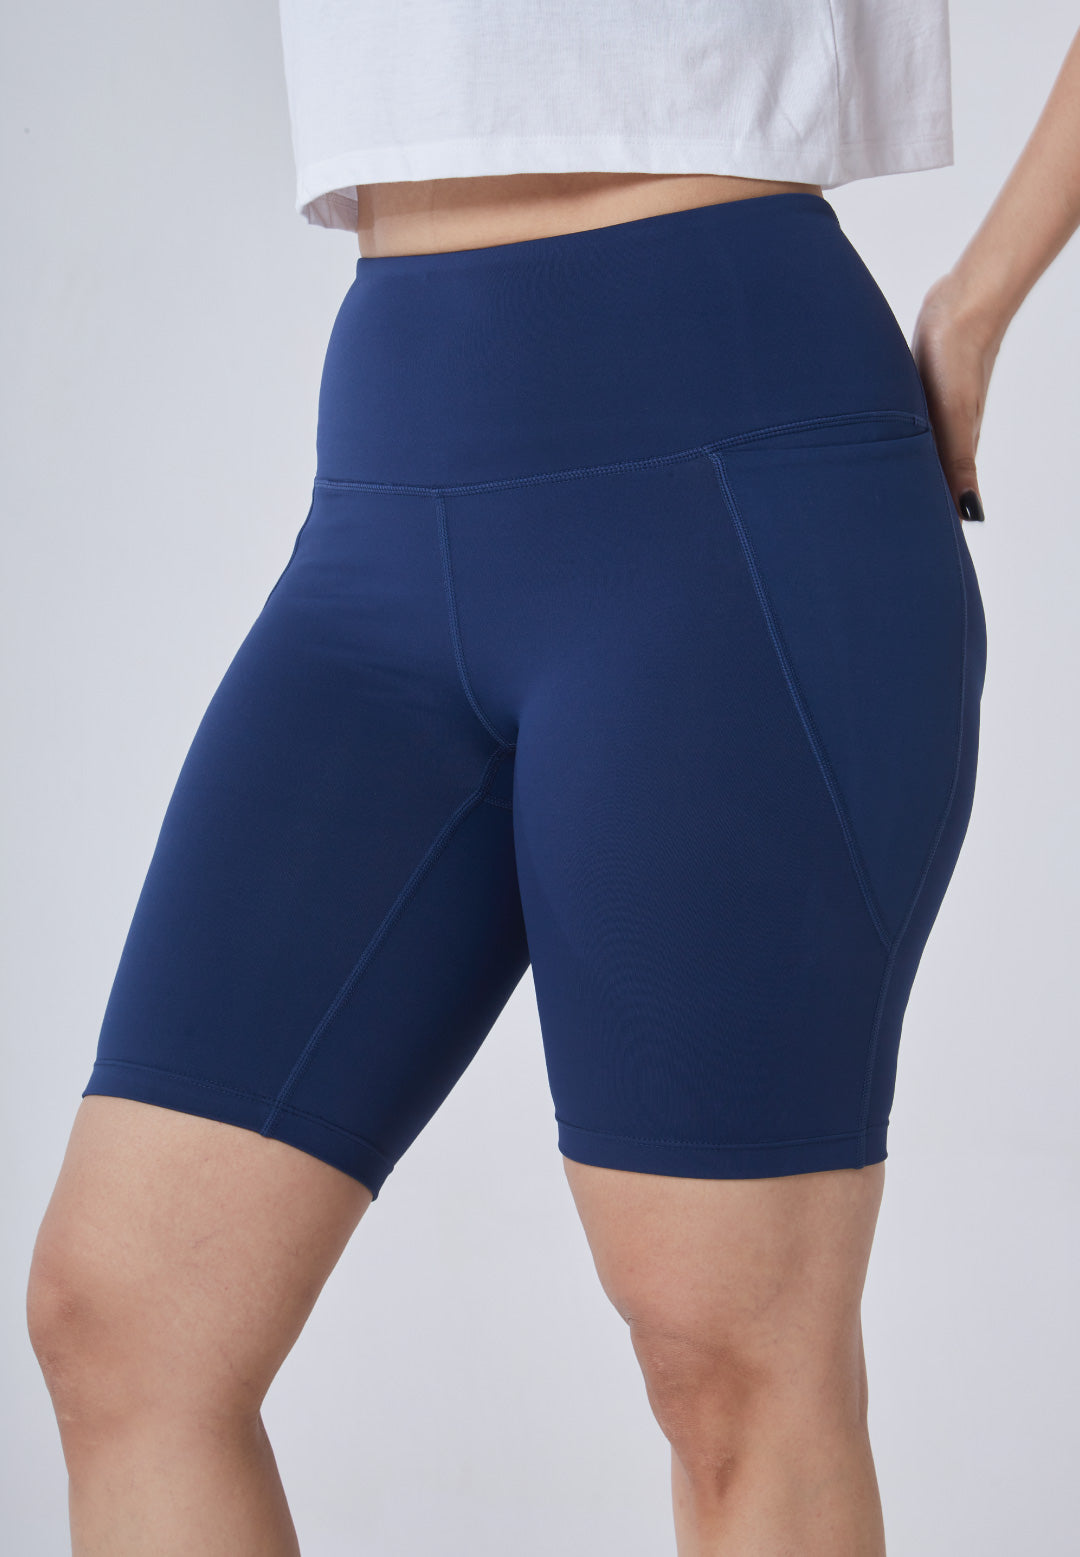 Womens High Waist Nulu Cropped Slim Yoga LU 55 Oversized Five Point Fitness  Gym Capris For Biking, Golf, And Tennis From Luyogastar, $18.82